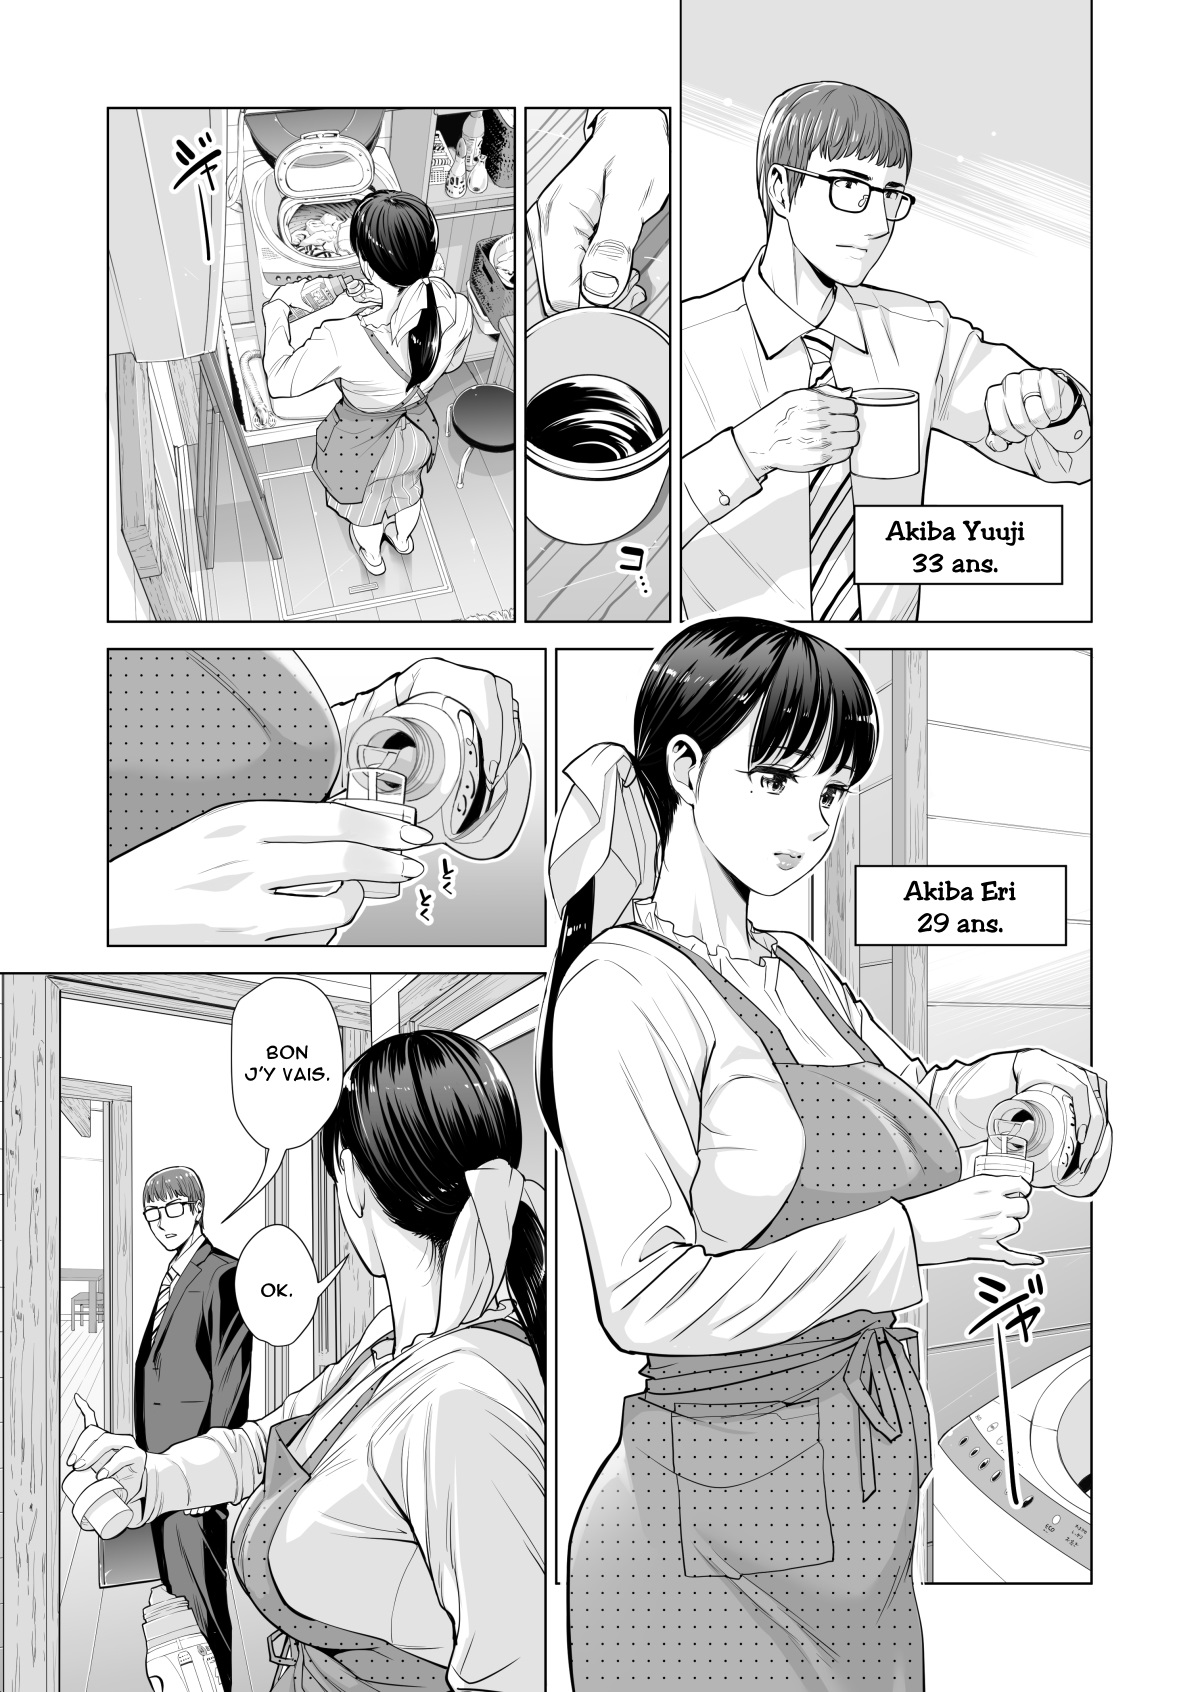 Tsukiyo no Midare Zake  Moonlit Intoxication ~ A Housewife Stolen by a Coworker Besides her Blackout Drunk Husband ~ Chapter 1 numero d'image 5